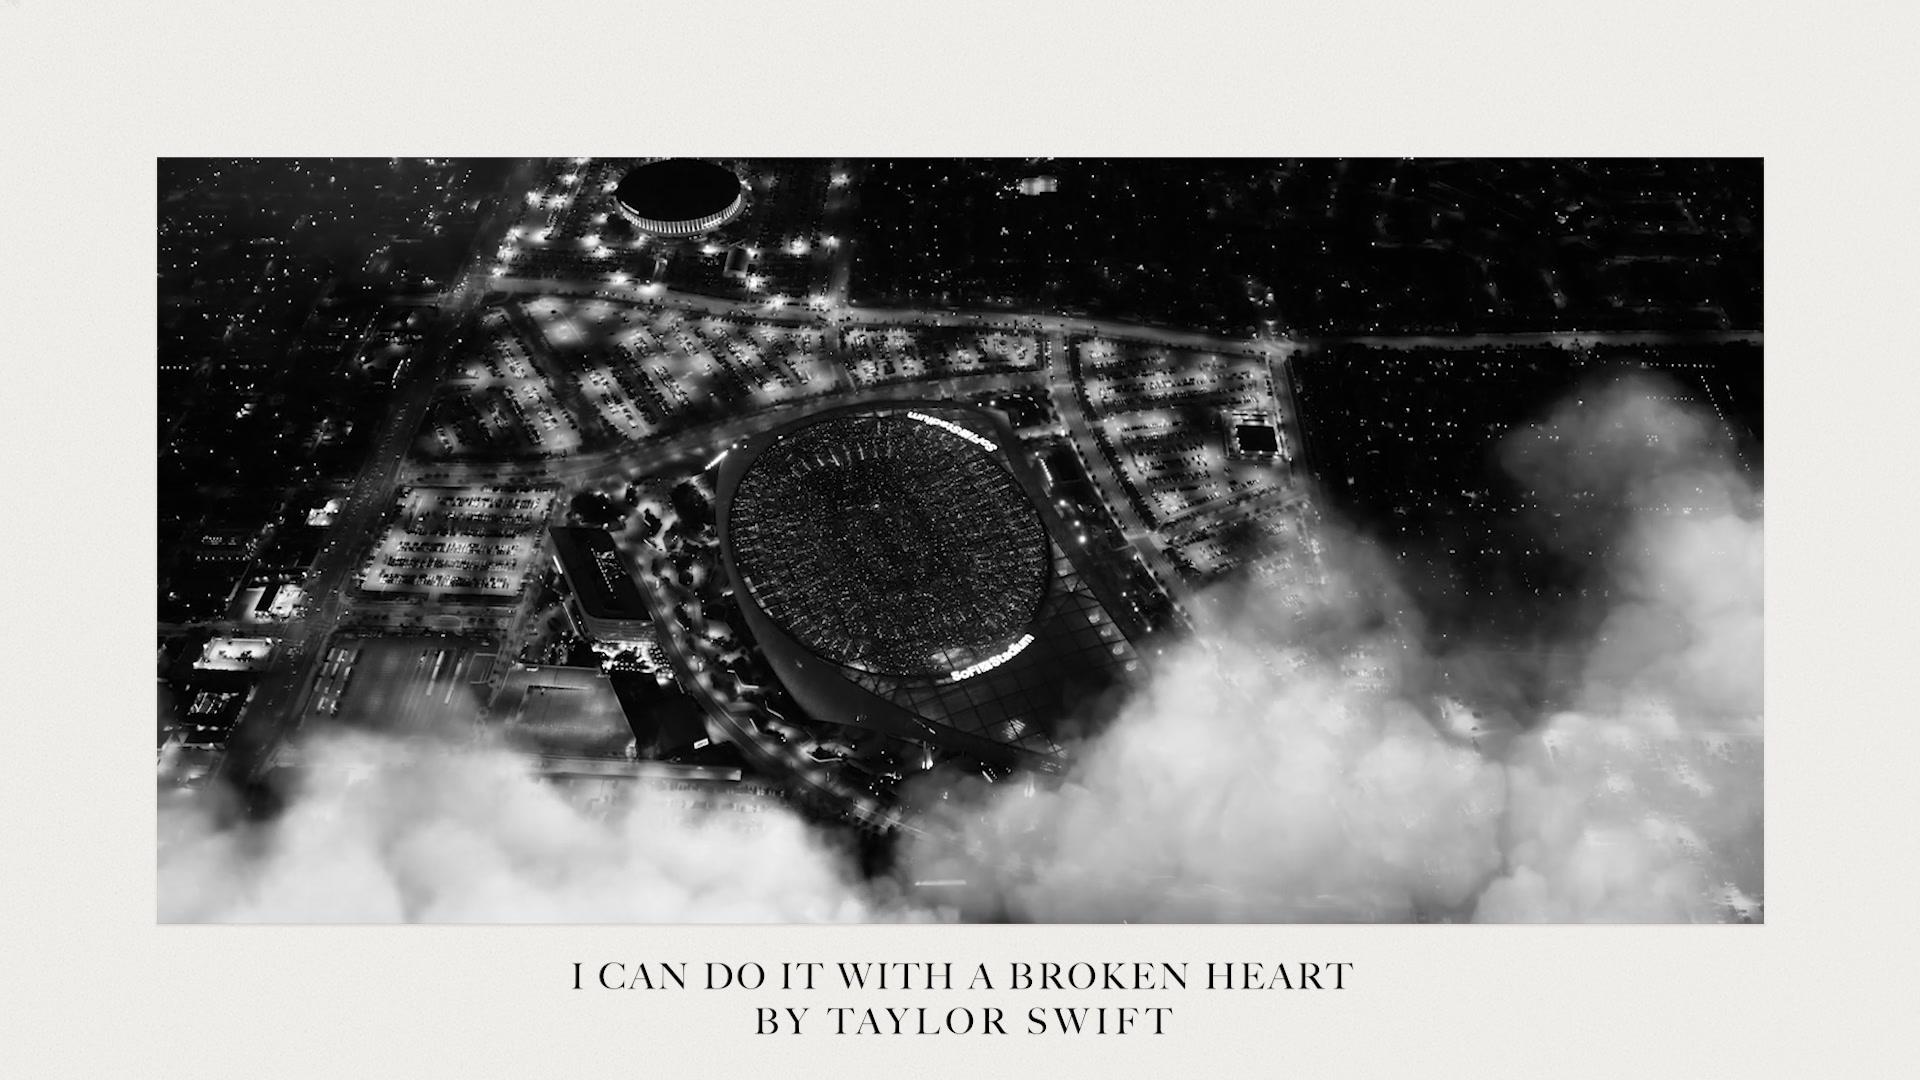 Taylor Swift - I Can Do It With a Broken Heart (Lyric Video)